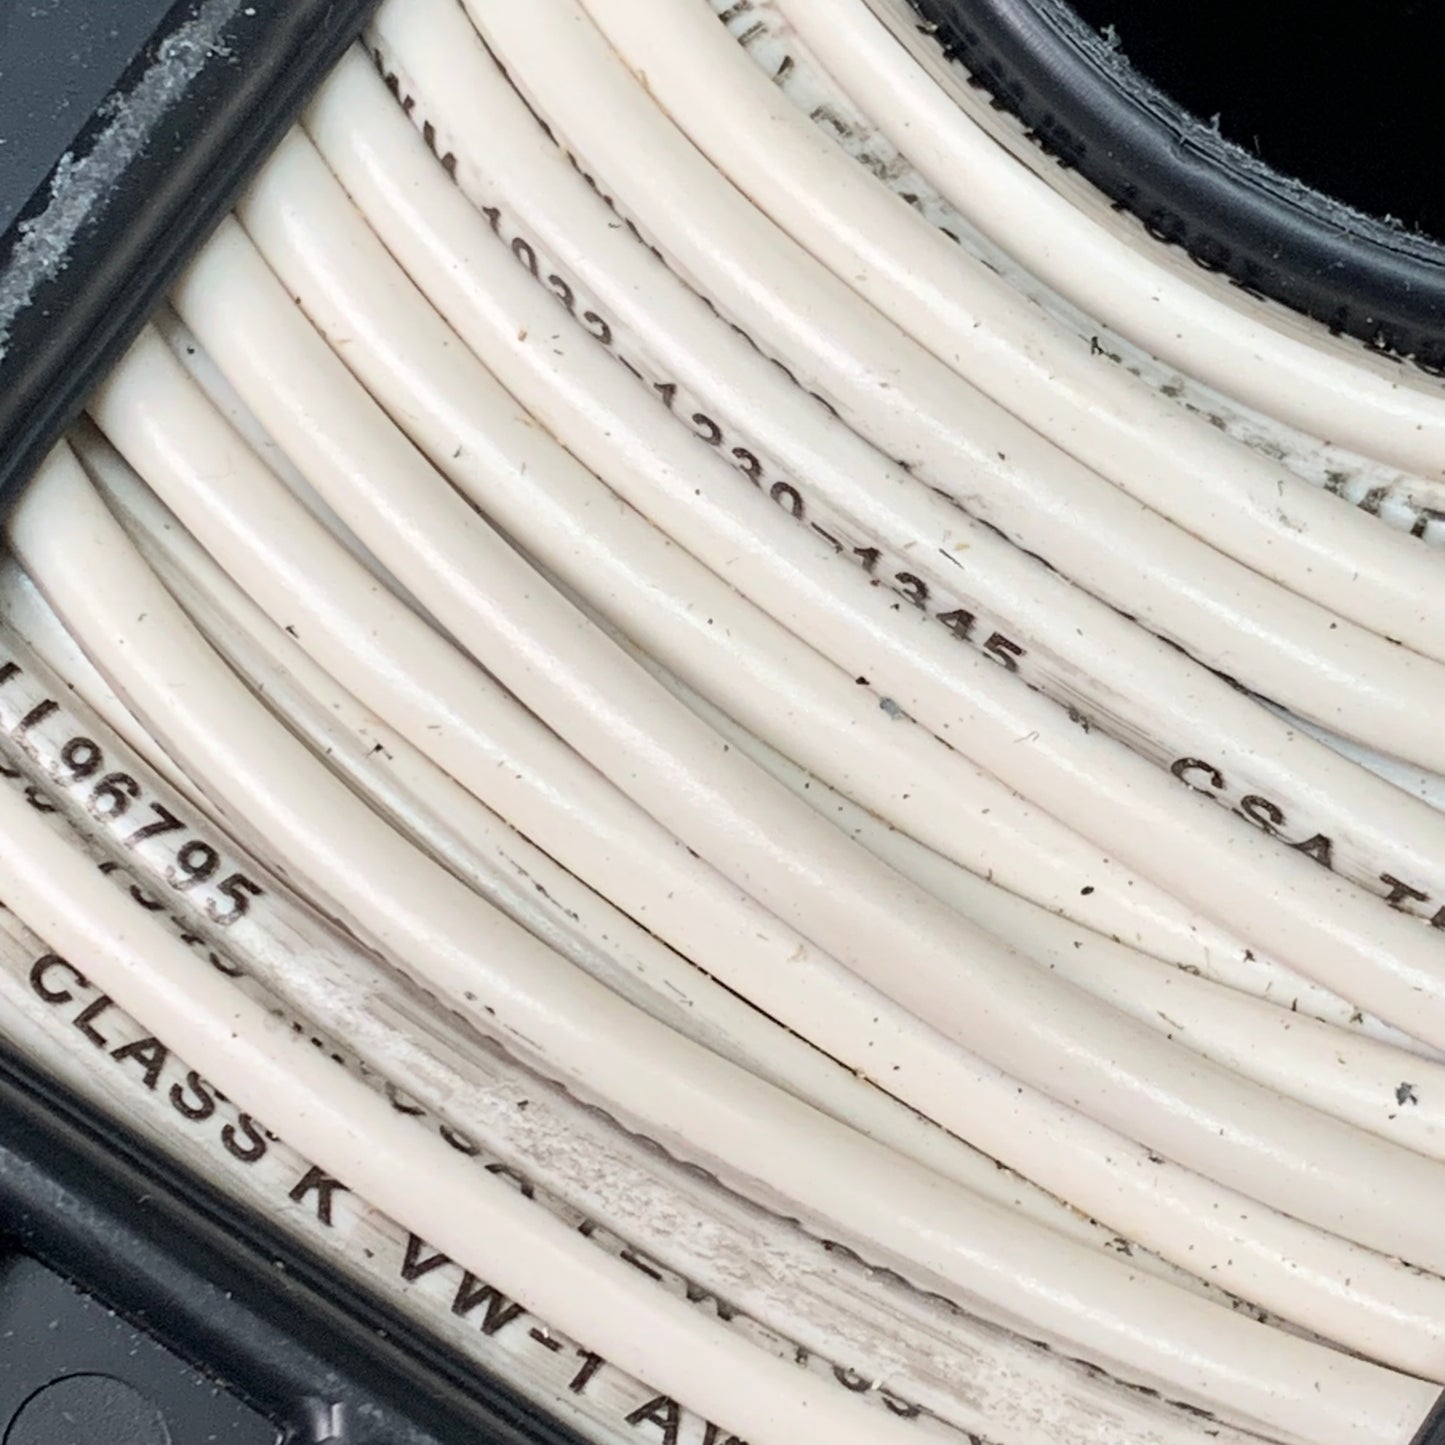 AWM Style 1032 500 FT 16 AWG Appliance Wire 26 Strand White 16MT21 (New)